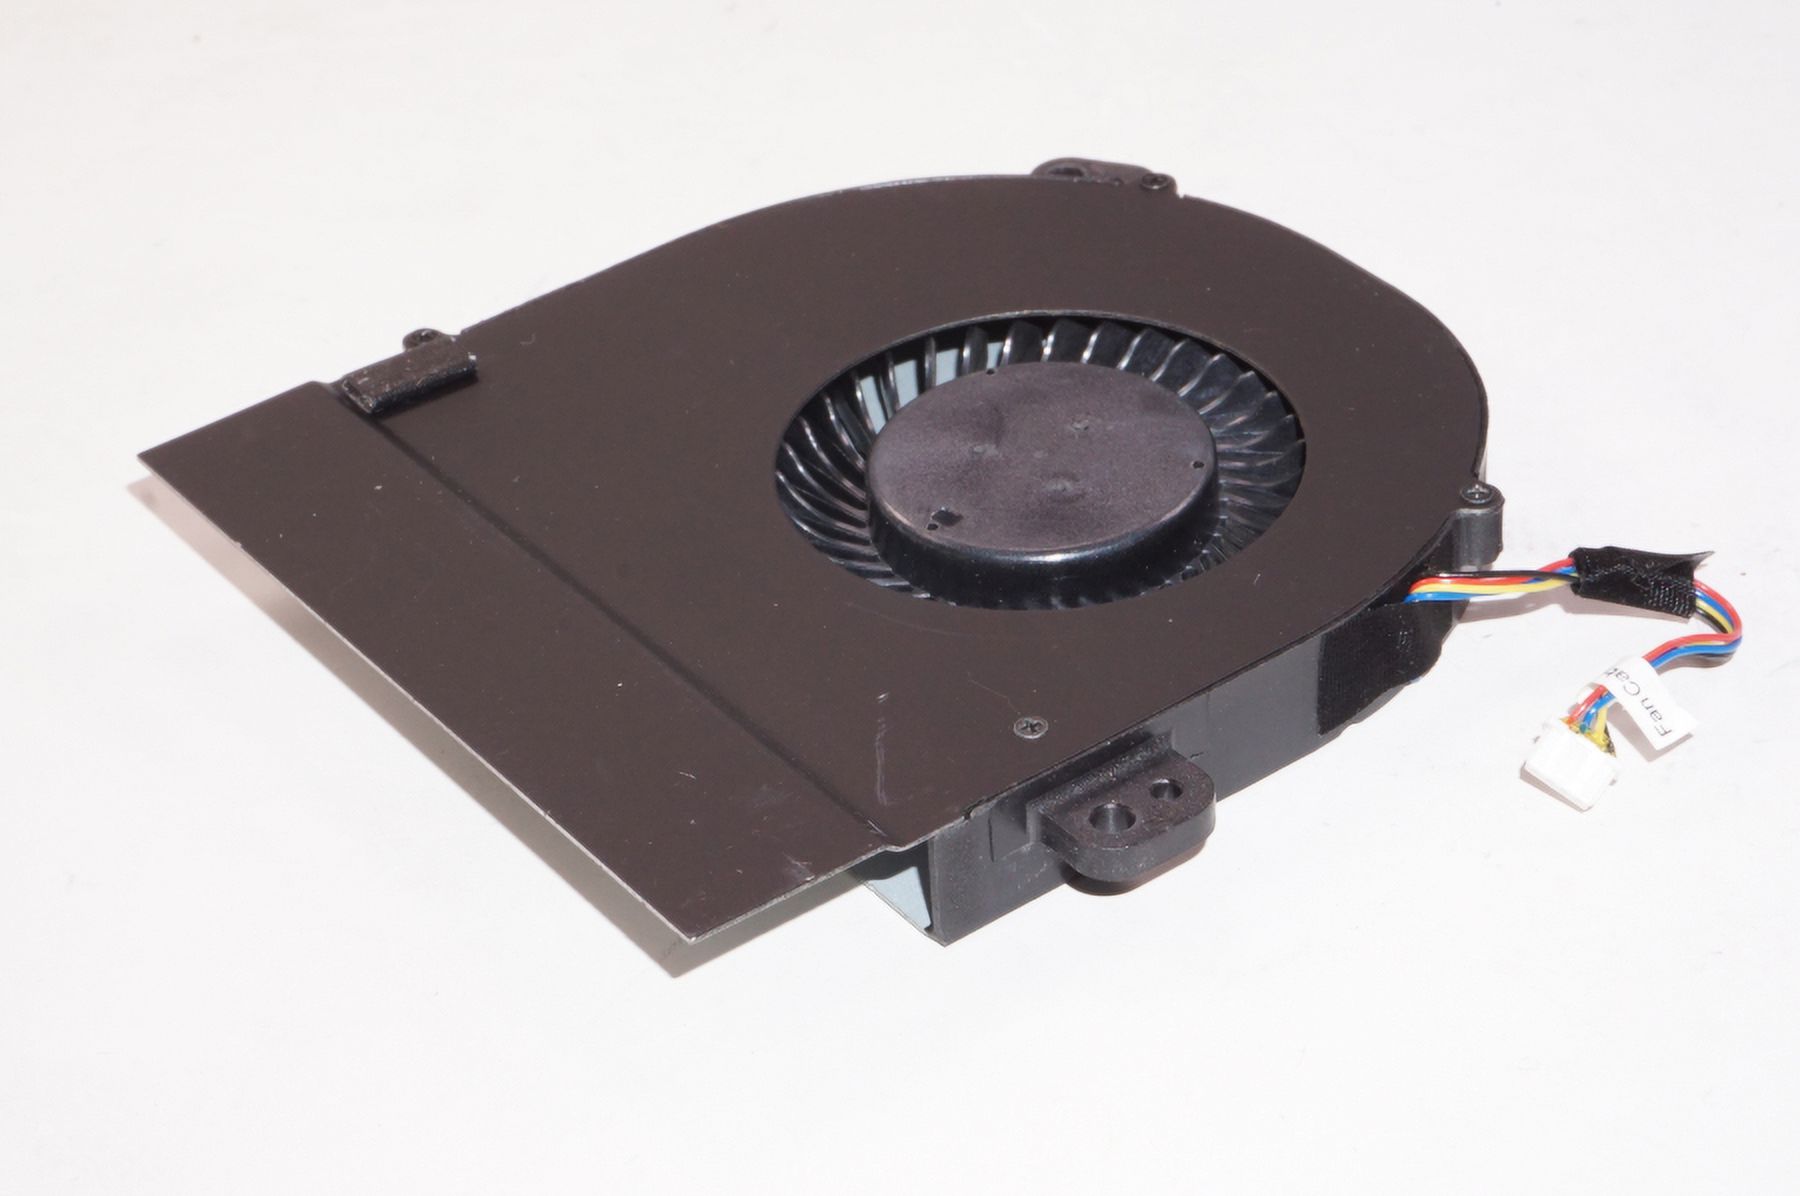 7740Y Dell Cooling Fan ALIENWARE 17 (AW17R3-375) alienware 17 r3 - image 2 of 2